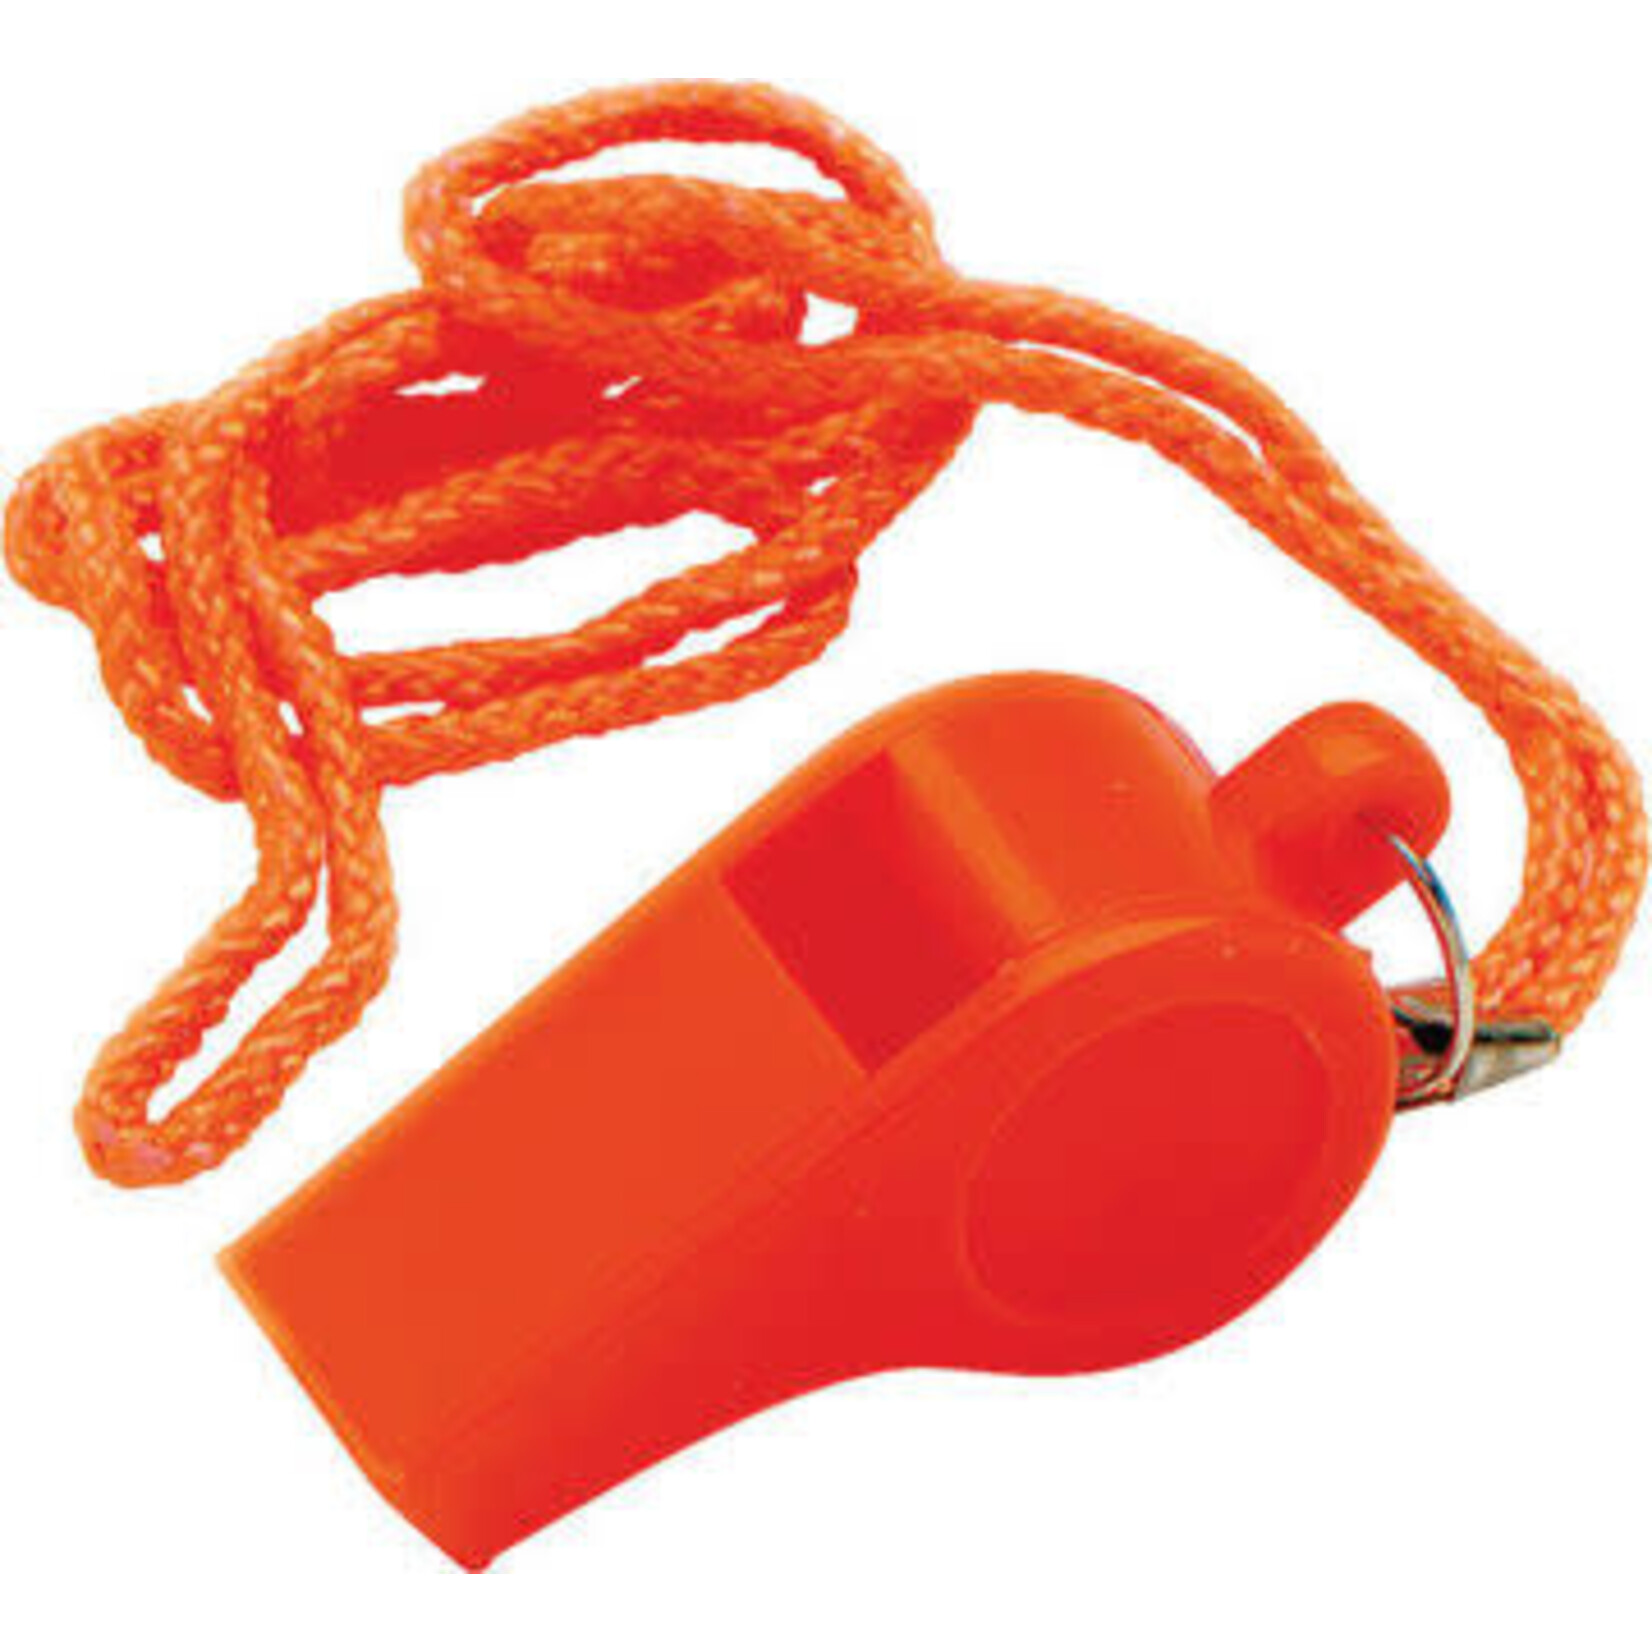 SeaSense/Unified Marine Seasense SAFETY WHISTLE USCG APPROVED PEALESS 115dB SAFETY WHISTLE w/lanyard